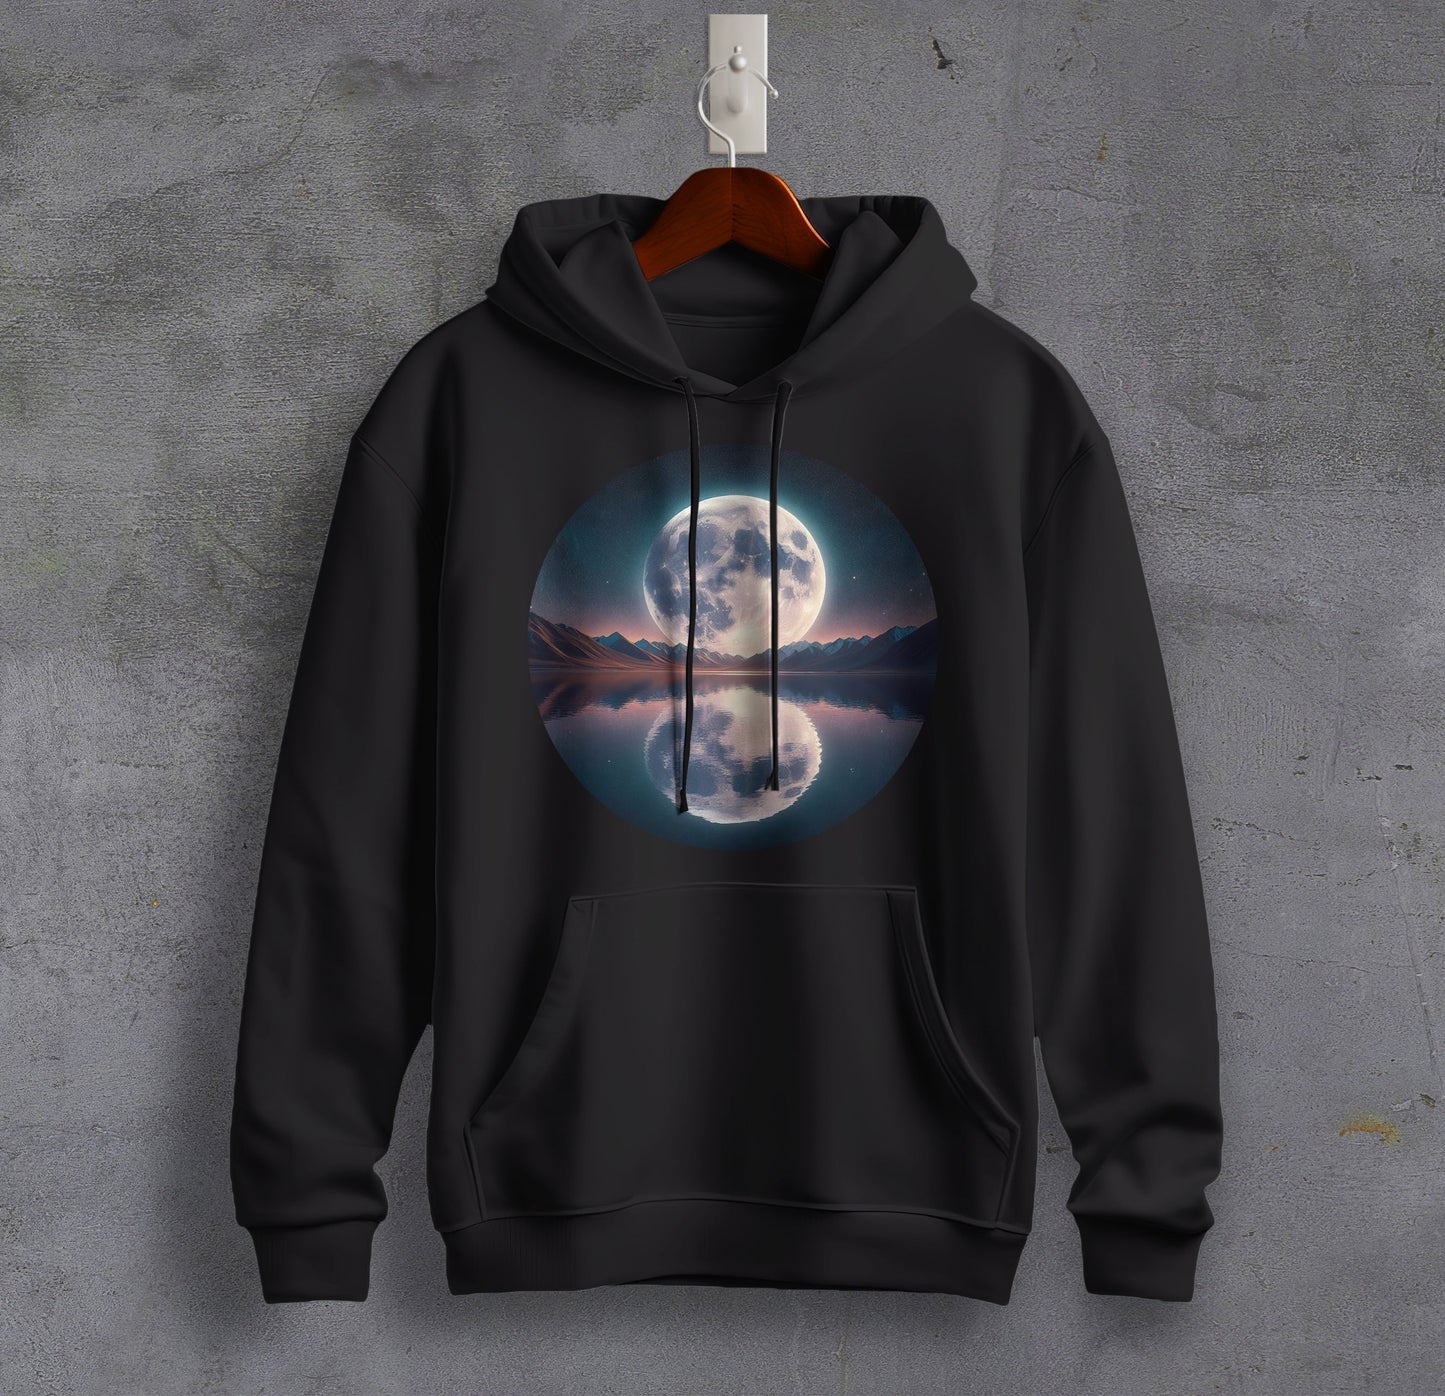 Reflections by the Lake - Full Moon Graphic Printed Hooded Sweat Shirt for Men - Cotton - Cosmos Sweat Shirt